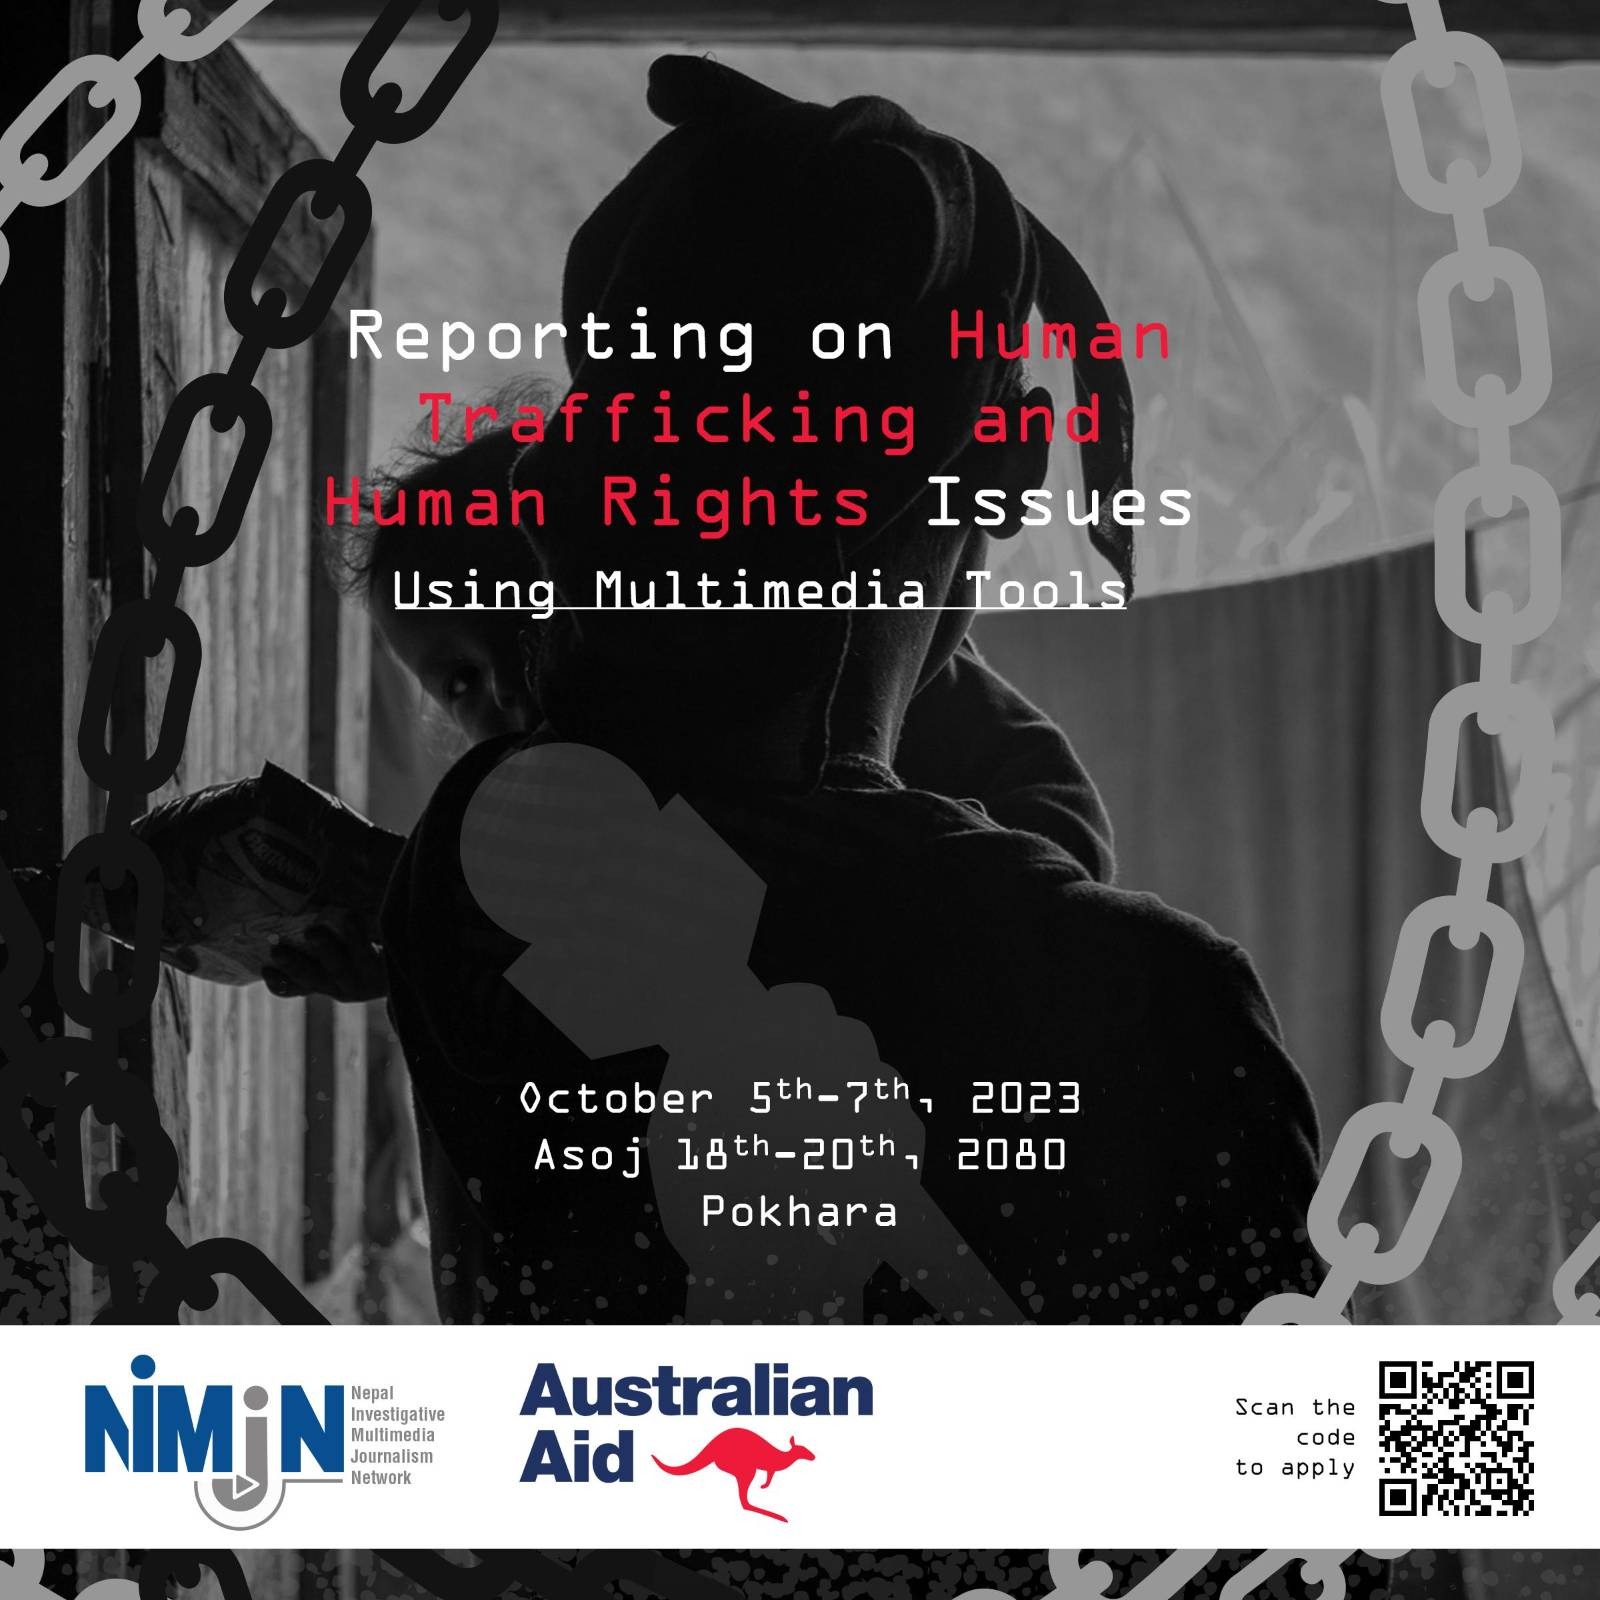 Training on Reporting on Human Trafficking and Human Rights Issues using Multimedia Tools